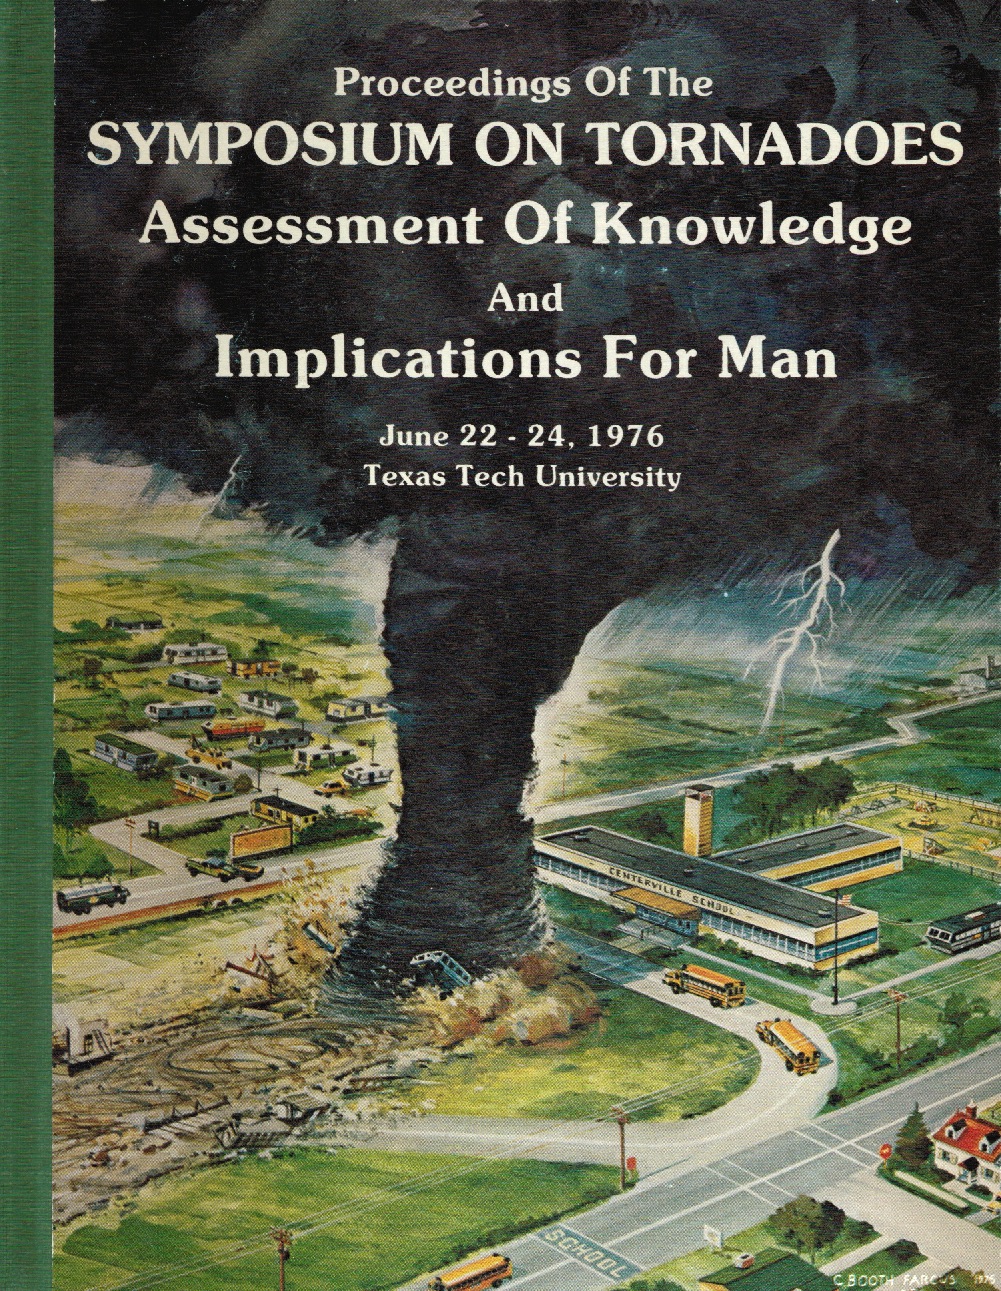 Cover of the first International Tornado Symposium, showing a large tornado on the ground.